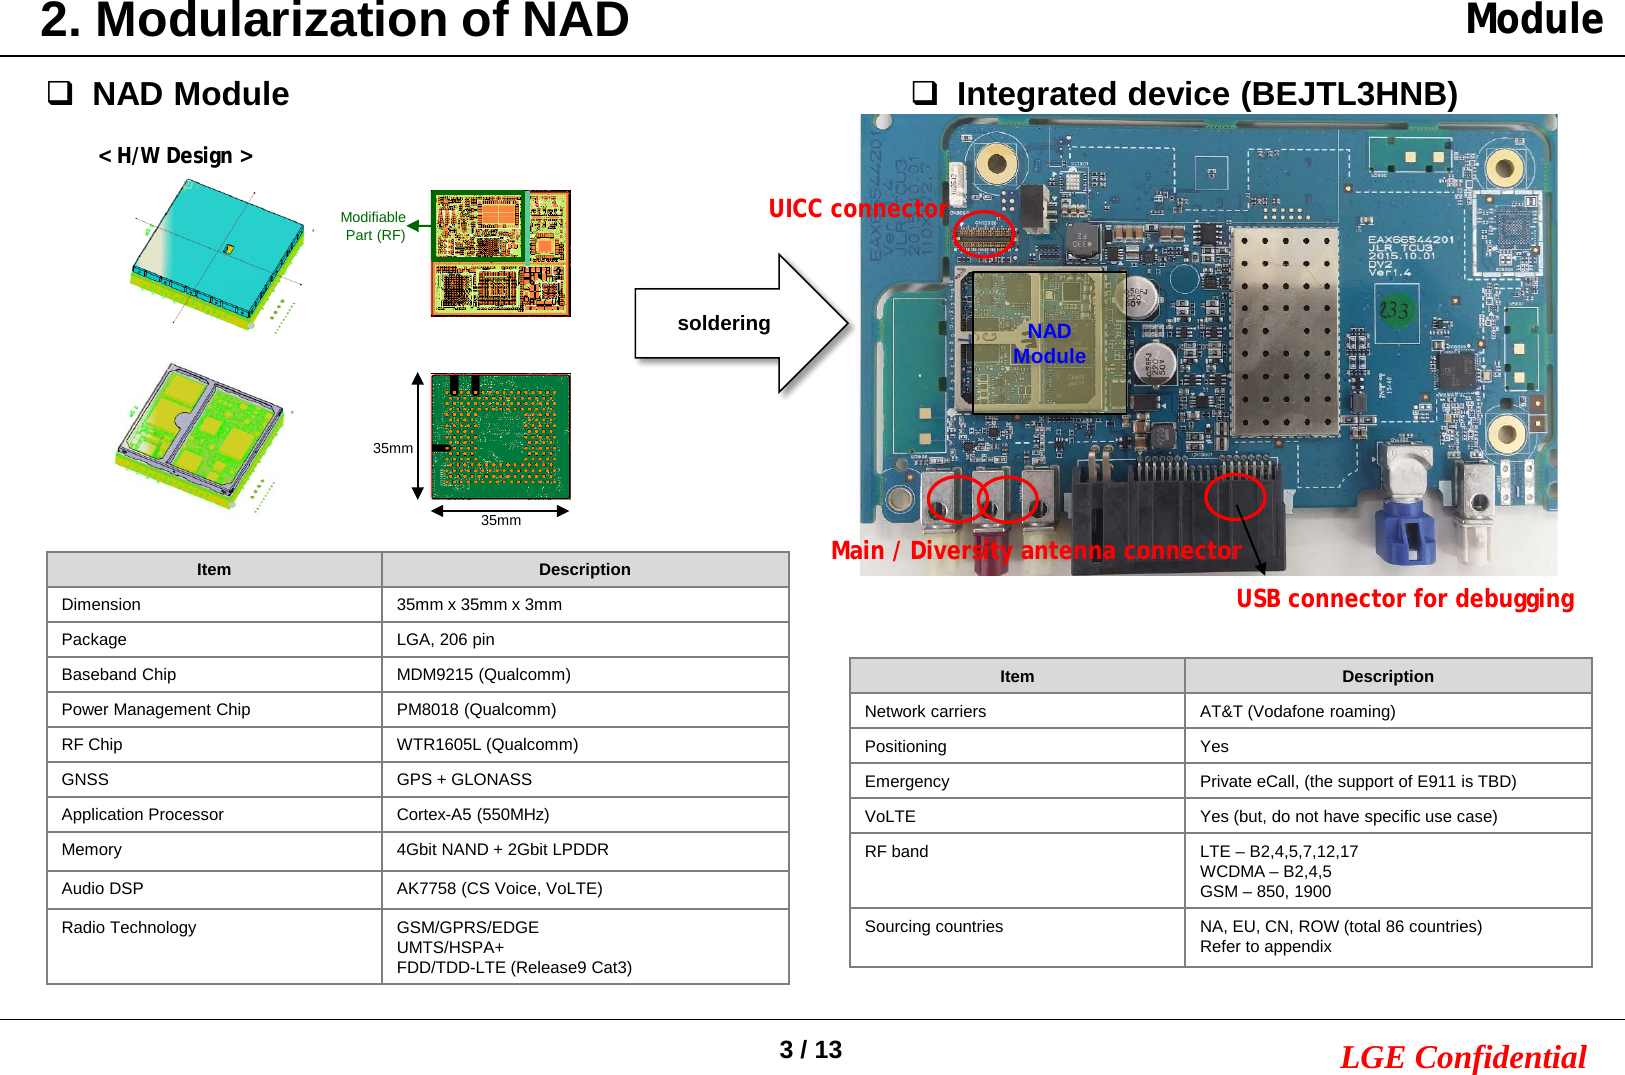 4/ 13 LGE Confidential3. Hardware Block DiagramNAD module is based on MDM9215 and it includes modem baseband, RF and GNSSNAD module is used as common platform for three type of variantsCertification is focused on NAD moduleDevices DifferenceBEJTL3TNB NAD module onlyBEJTL3LNB NAD module + External AP with WiFi hostBEJTL3HNB NAD module + External AP + WiFi ClientAPWiFi (Host)APWiFi (client)NAD moduleNAD moduleNAD module